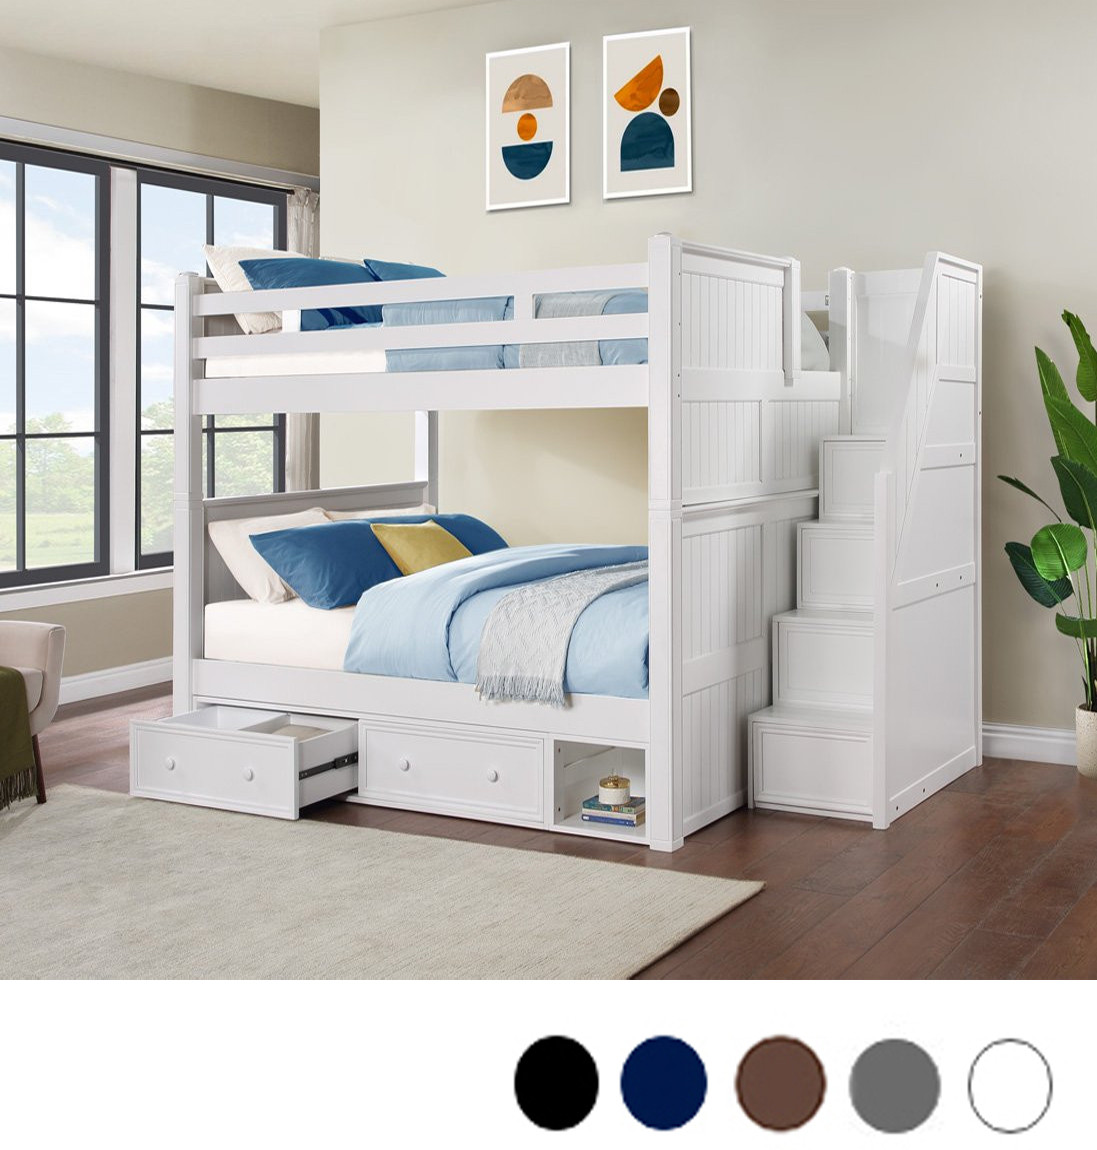 Dillon Queen Size Bunk Bed w/ Storage Stairs